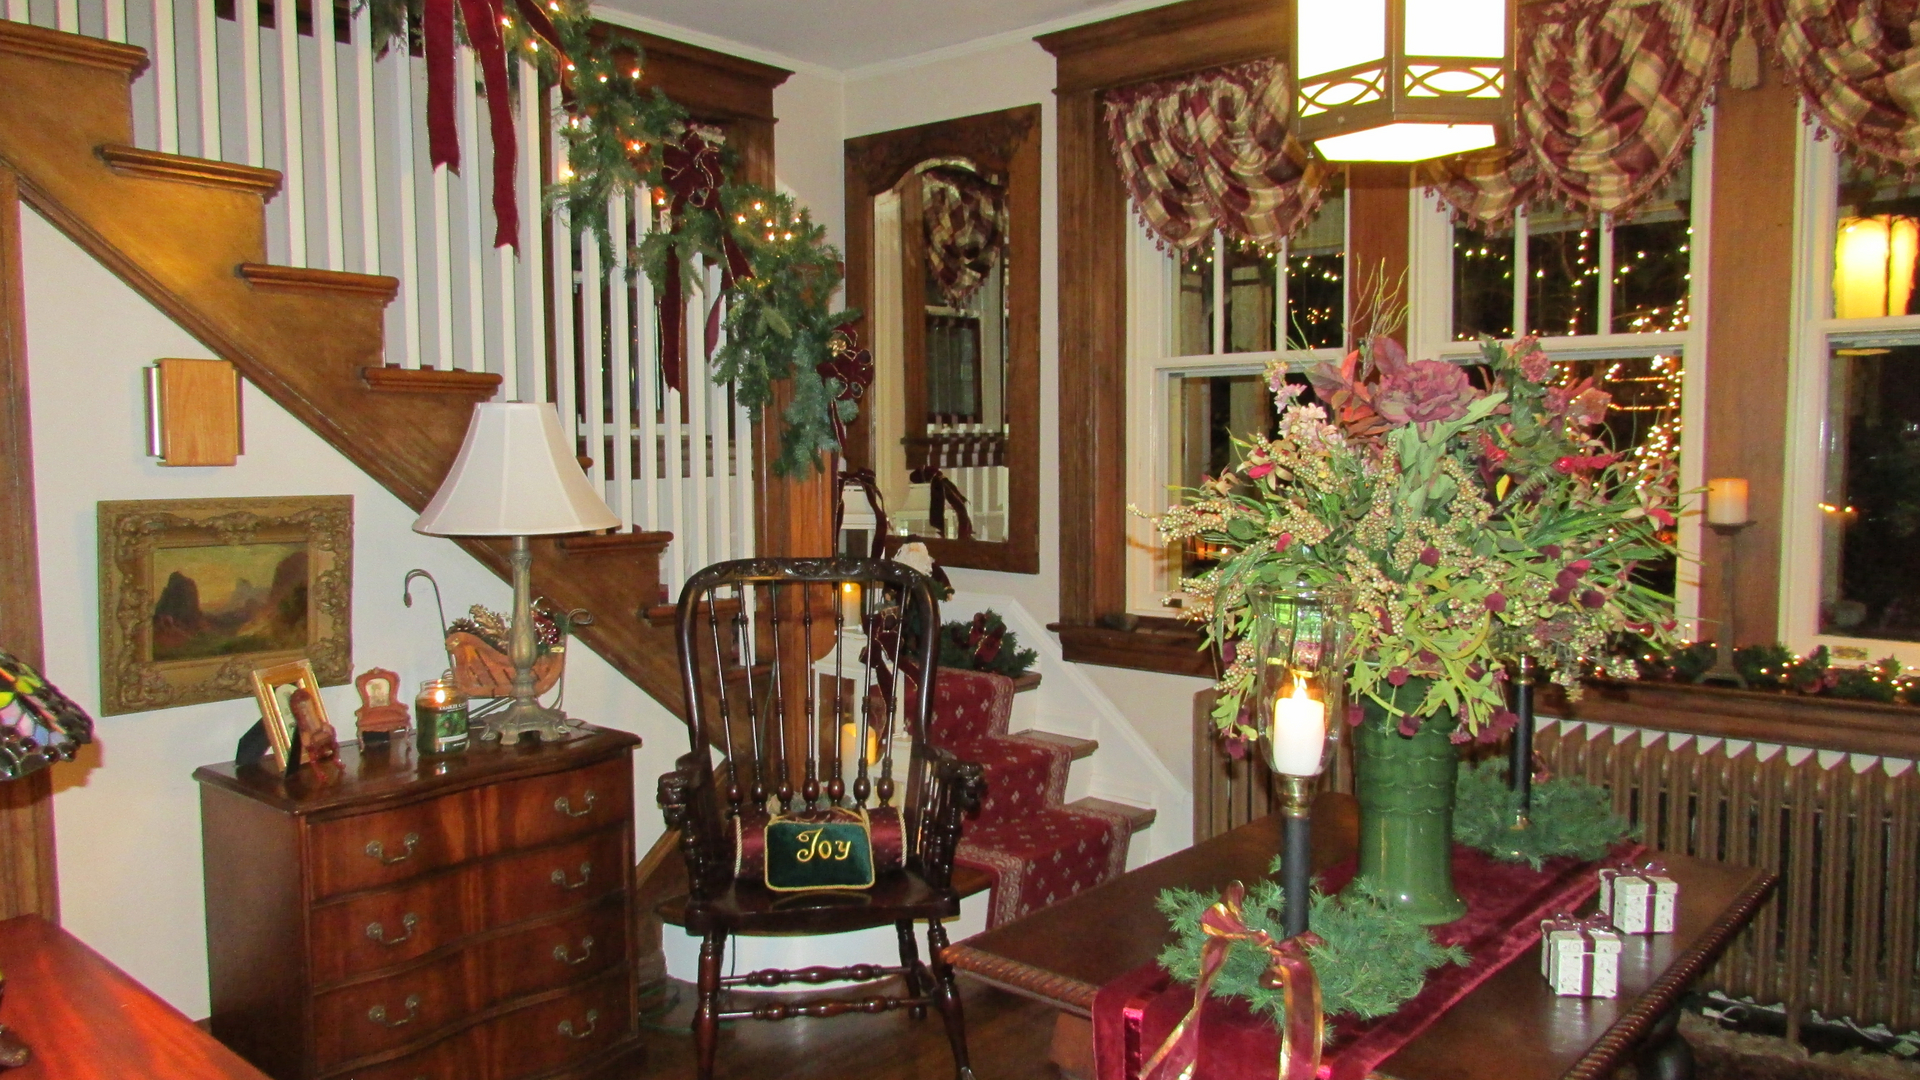 Mount Holly holiday house tours are part of the attraction of this New Jersey Christmas town.